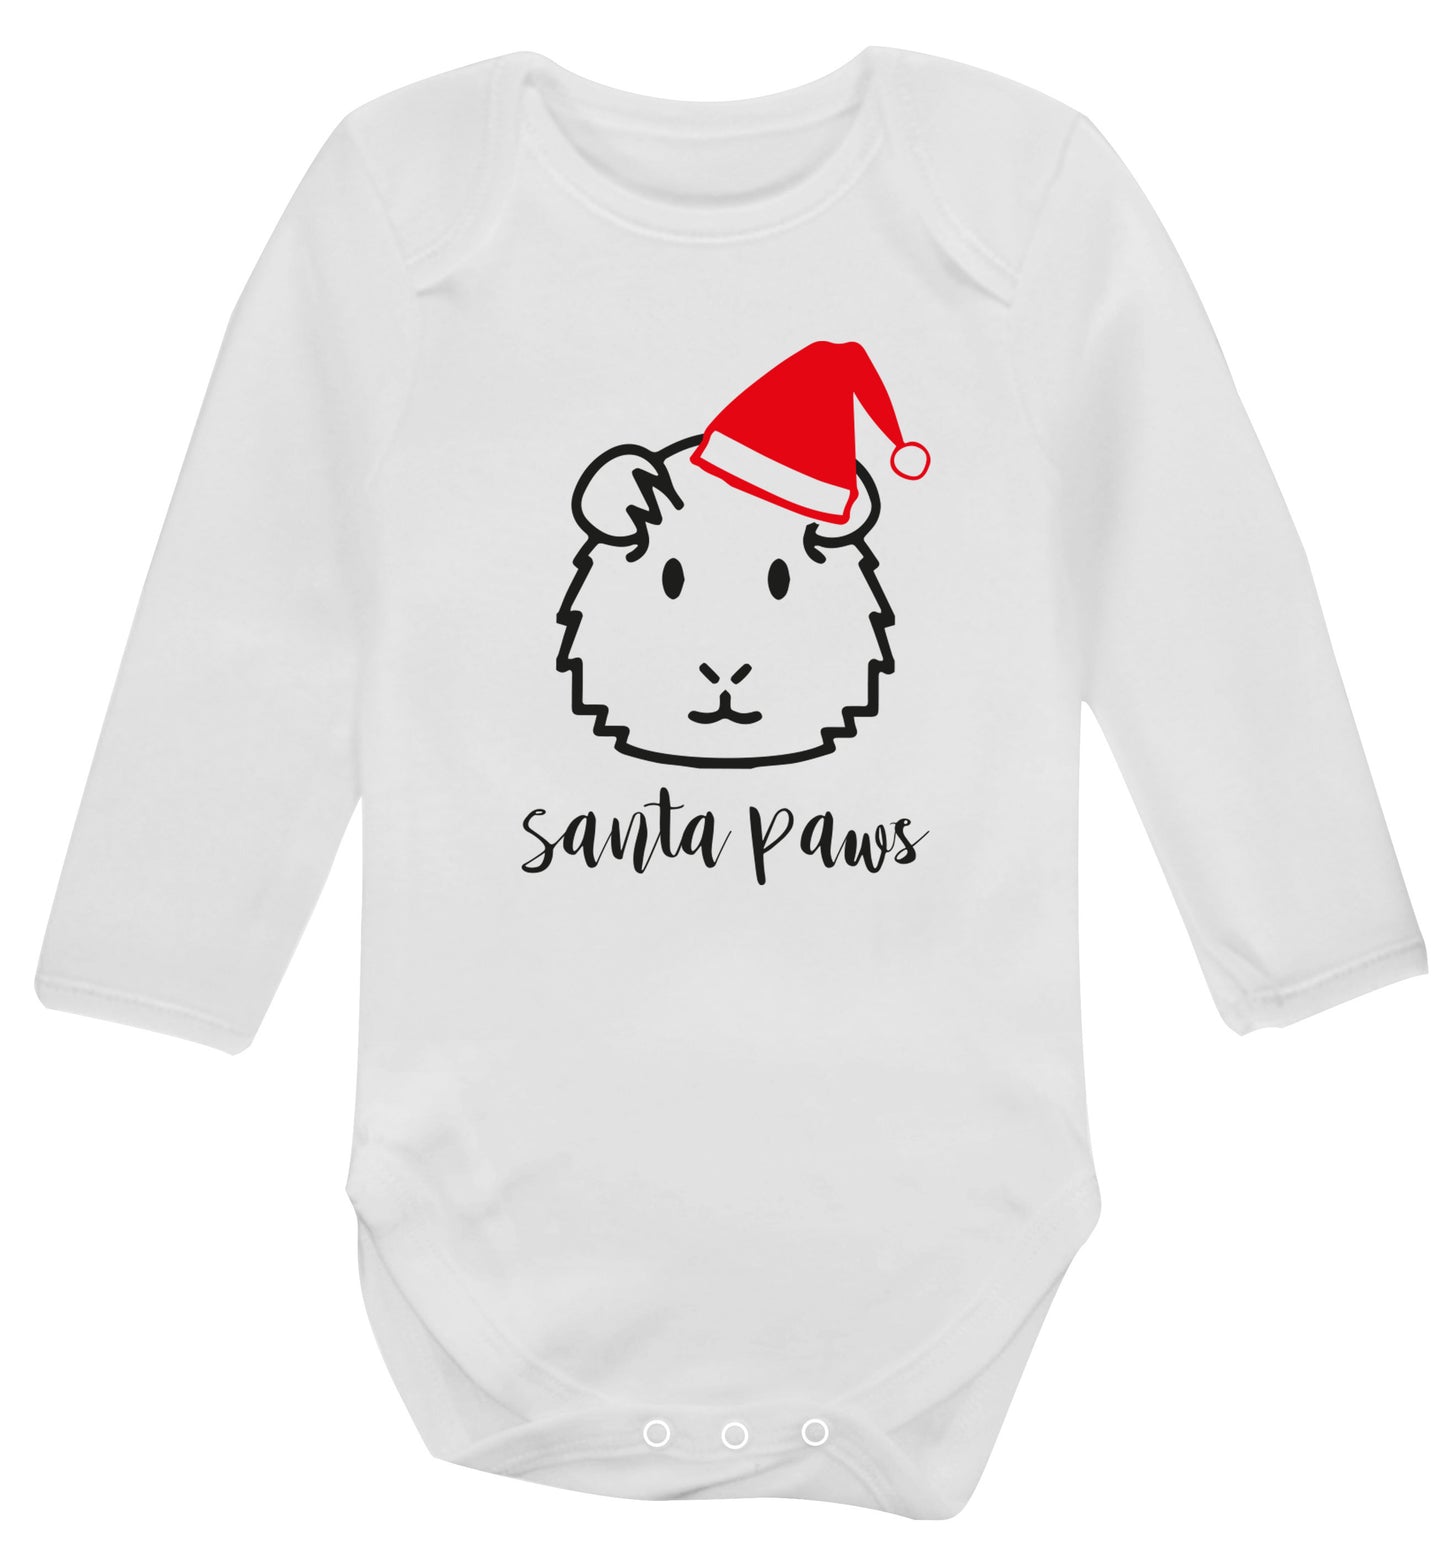 Guinea pig Santa Paws Baby Vest long sleeved white 6-12 months